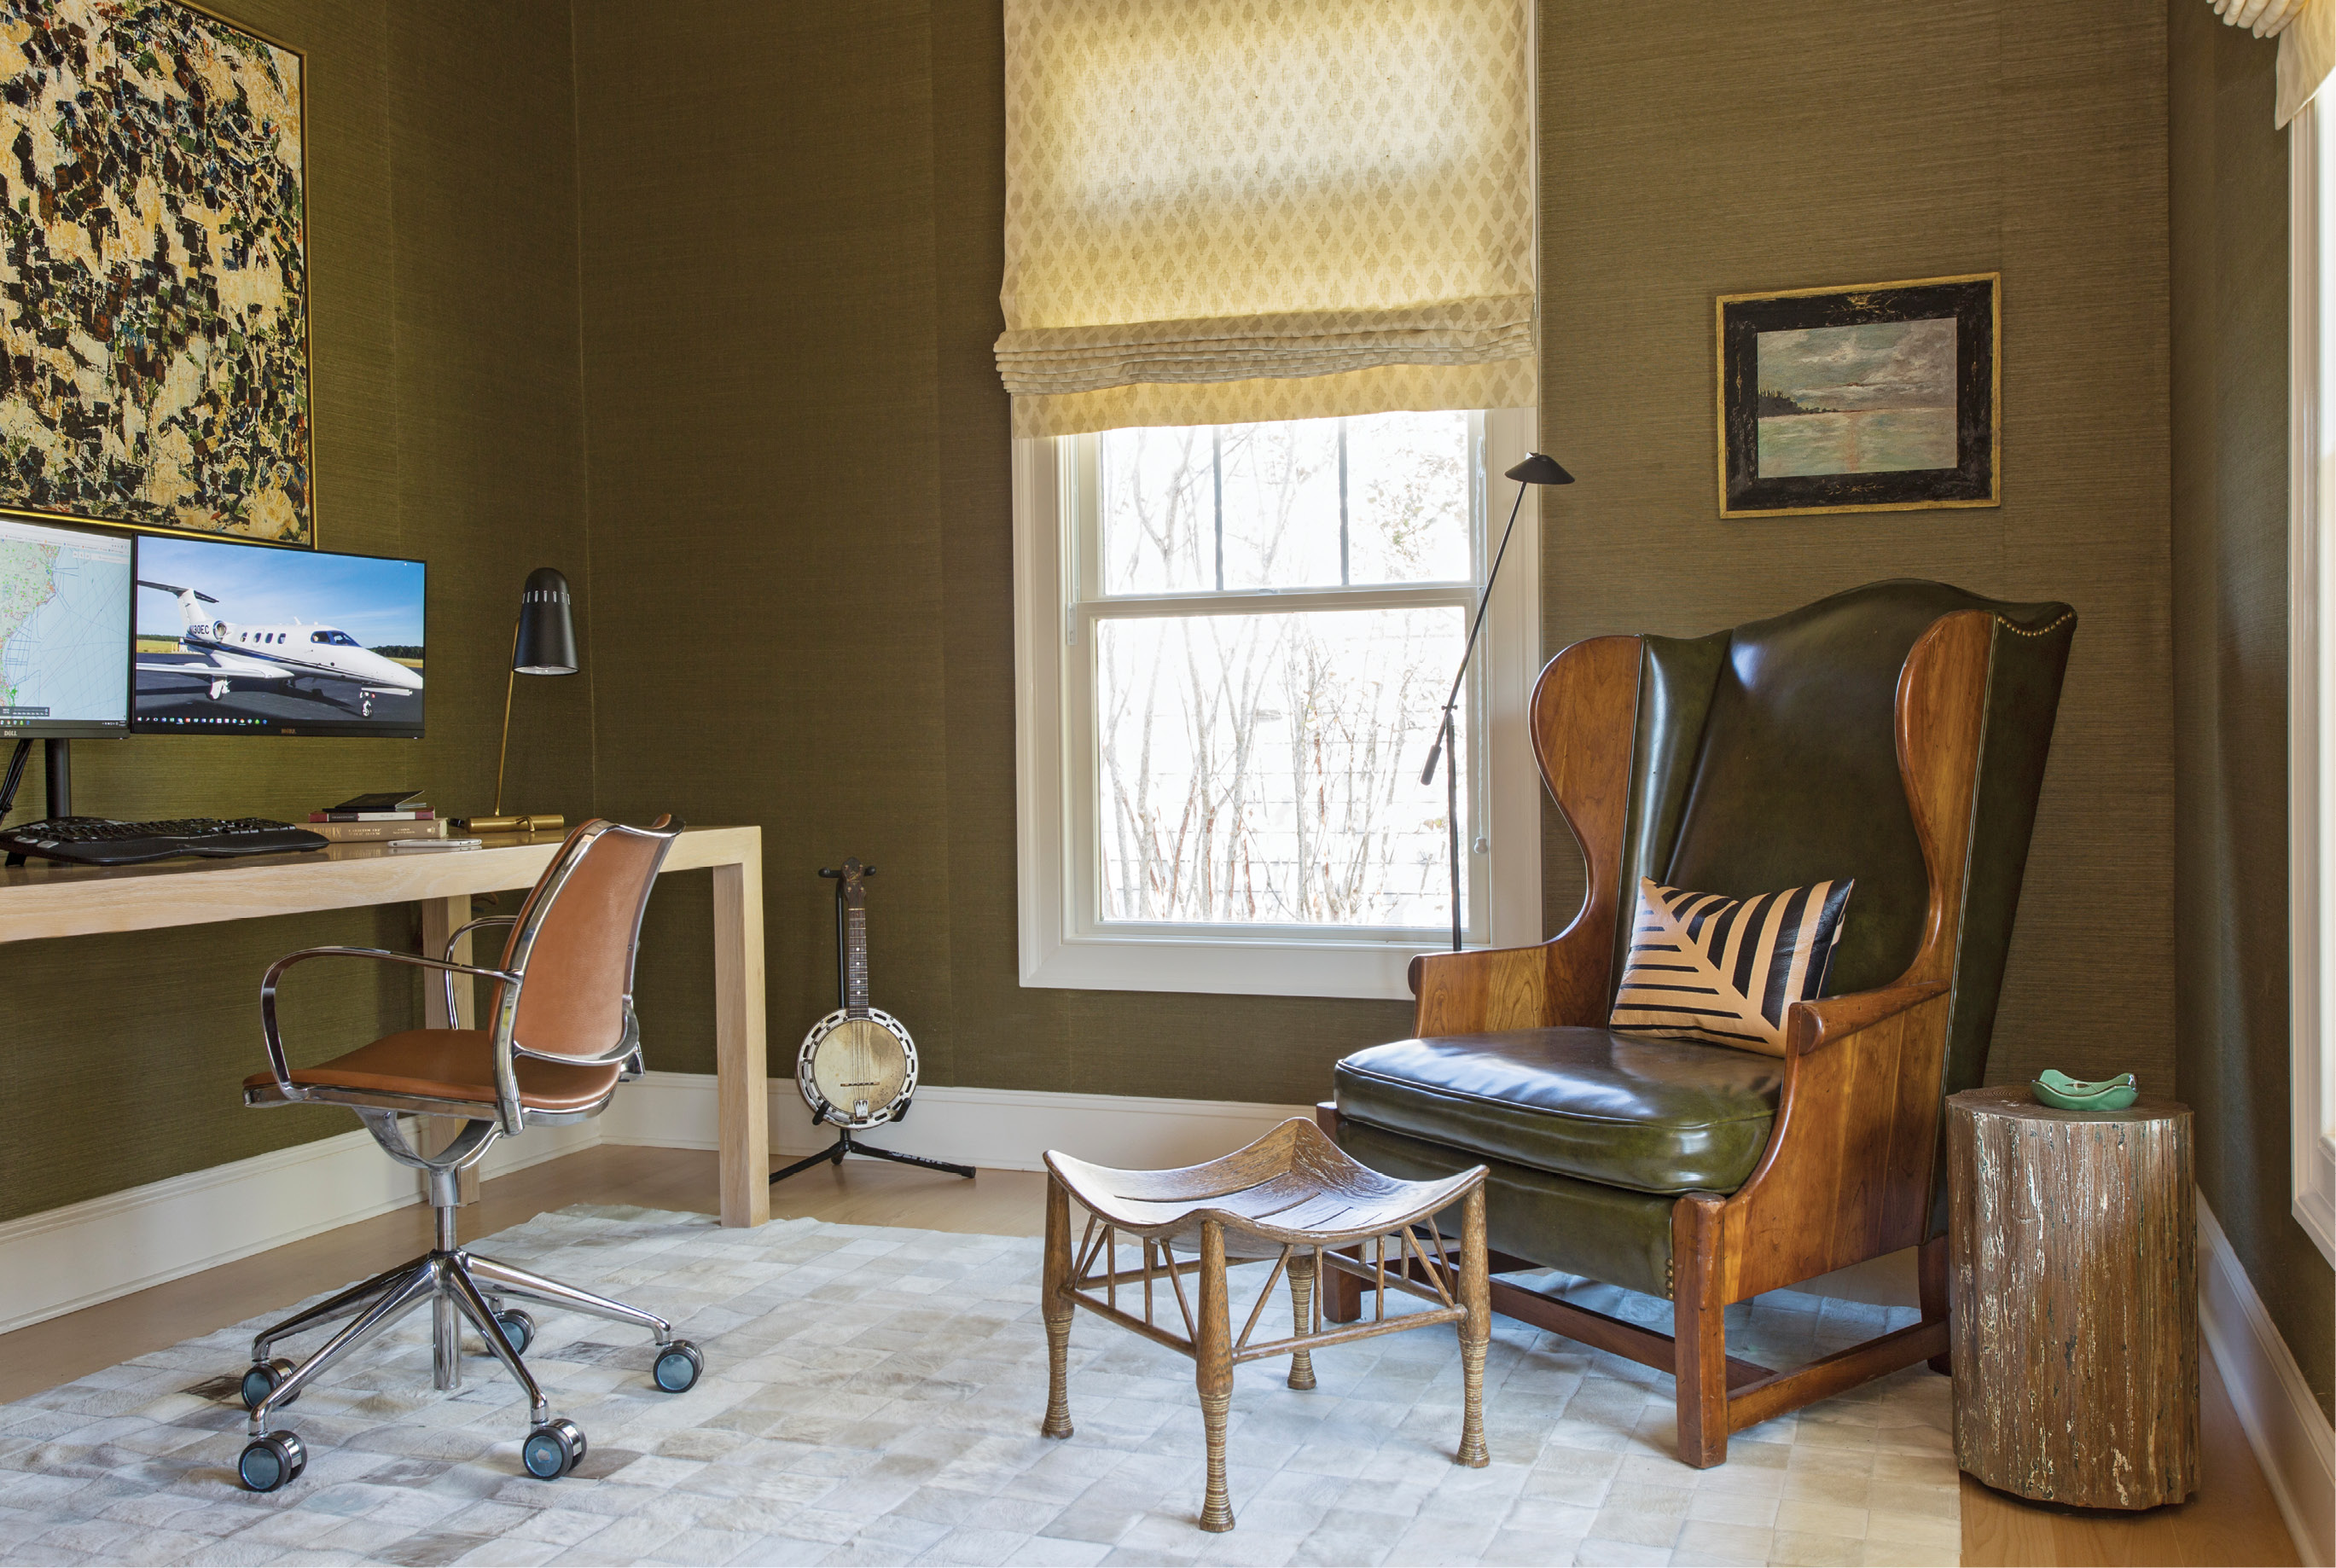 Phil’s home office features a custom desk crafted by Josh Brooks of J. Brooks Inc. and a vintage leather wing chair discovered at 17 South Antiques.